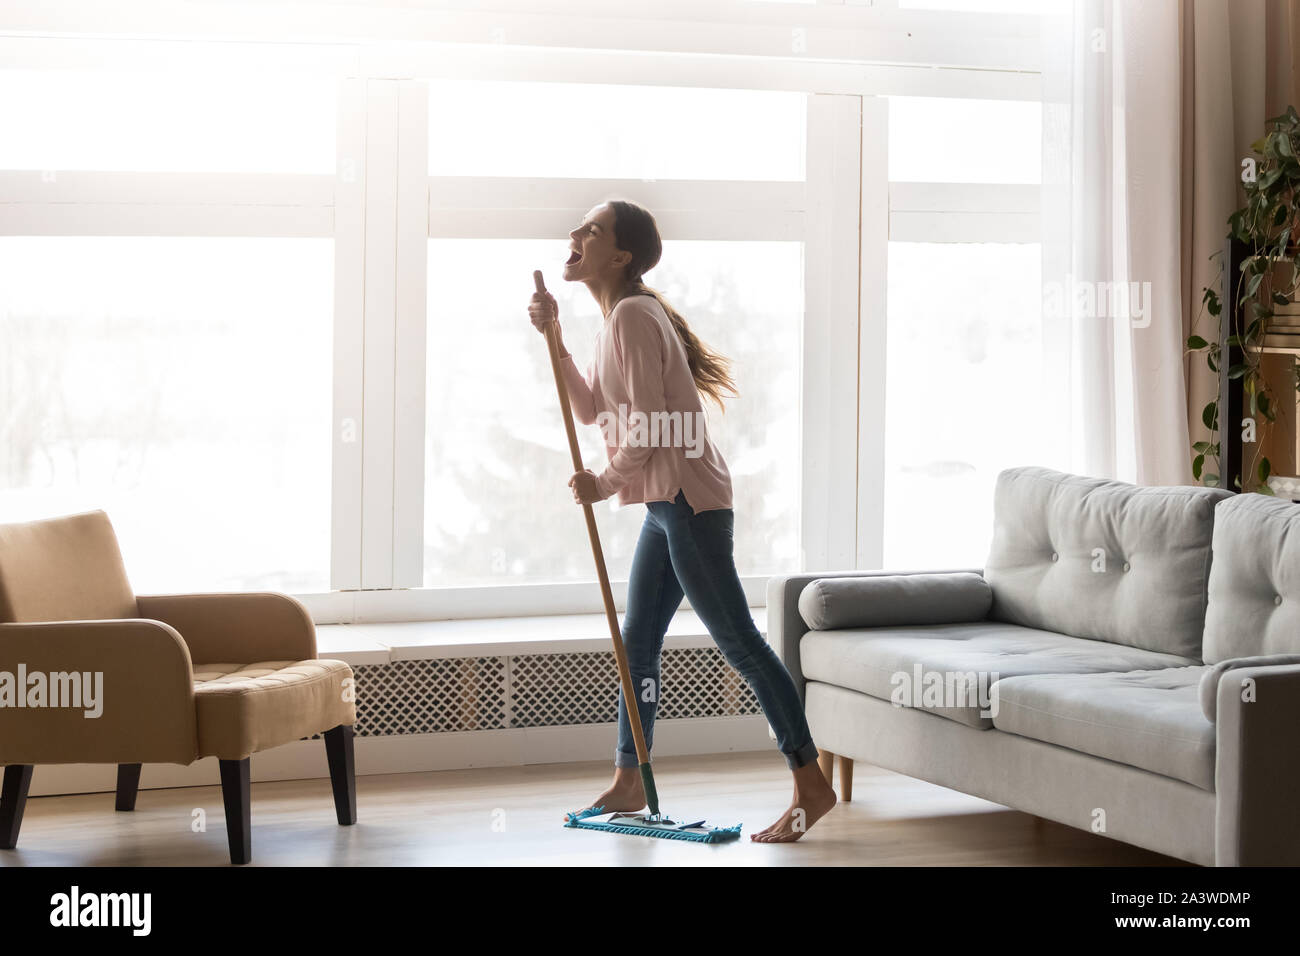 Funny woman holding mop microphone singing cleaning in living room Stock Photo